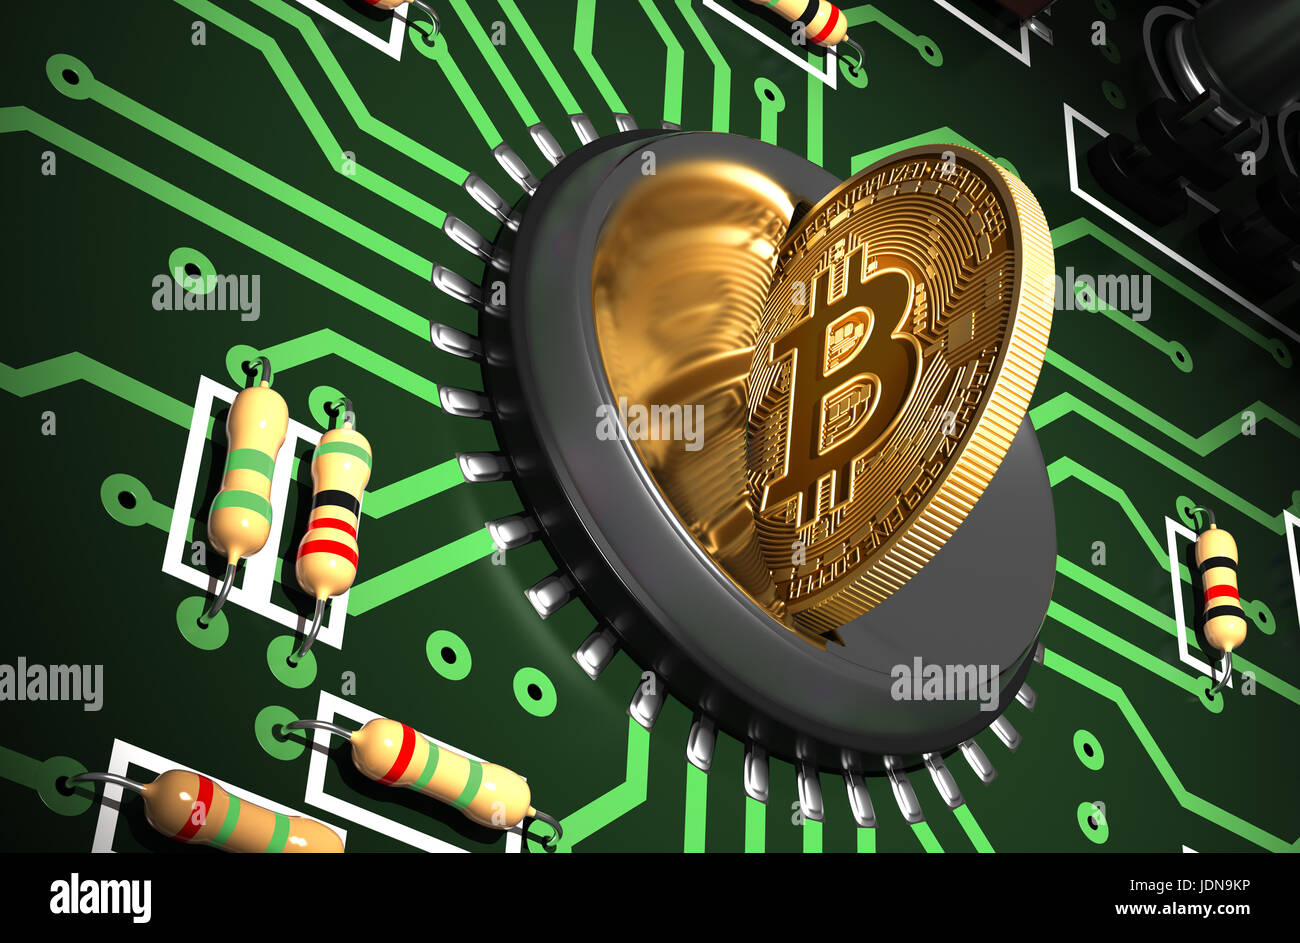 Putting Bitcoin Into Coin Slot On Green Motherboard And Creating Heart Shape With Reflection Stock Photo